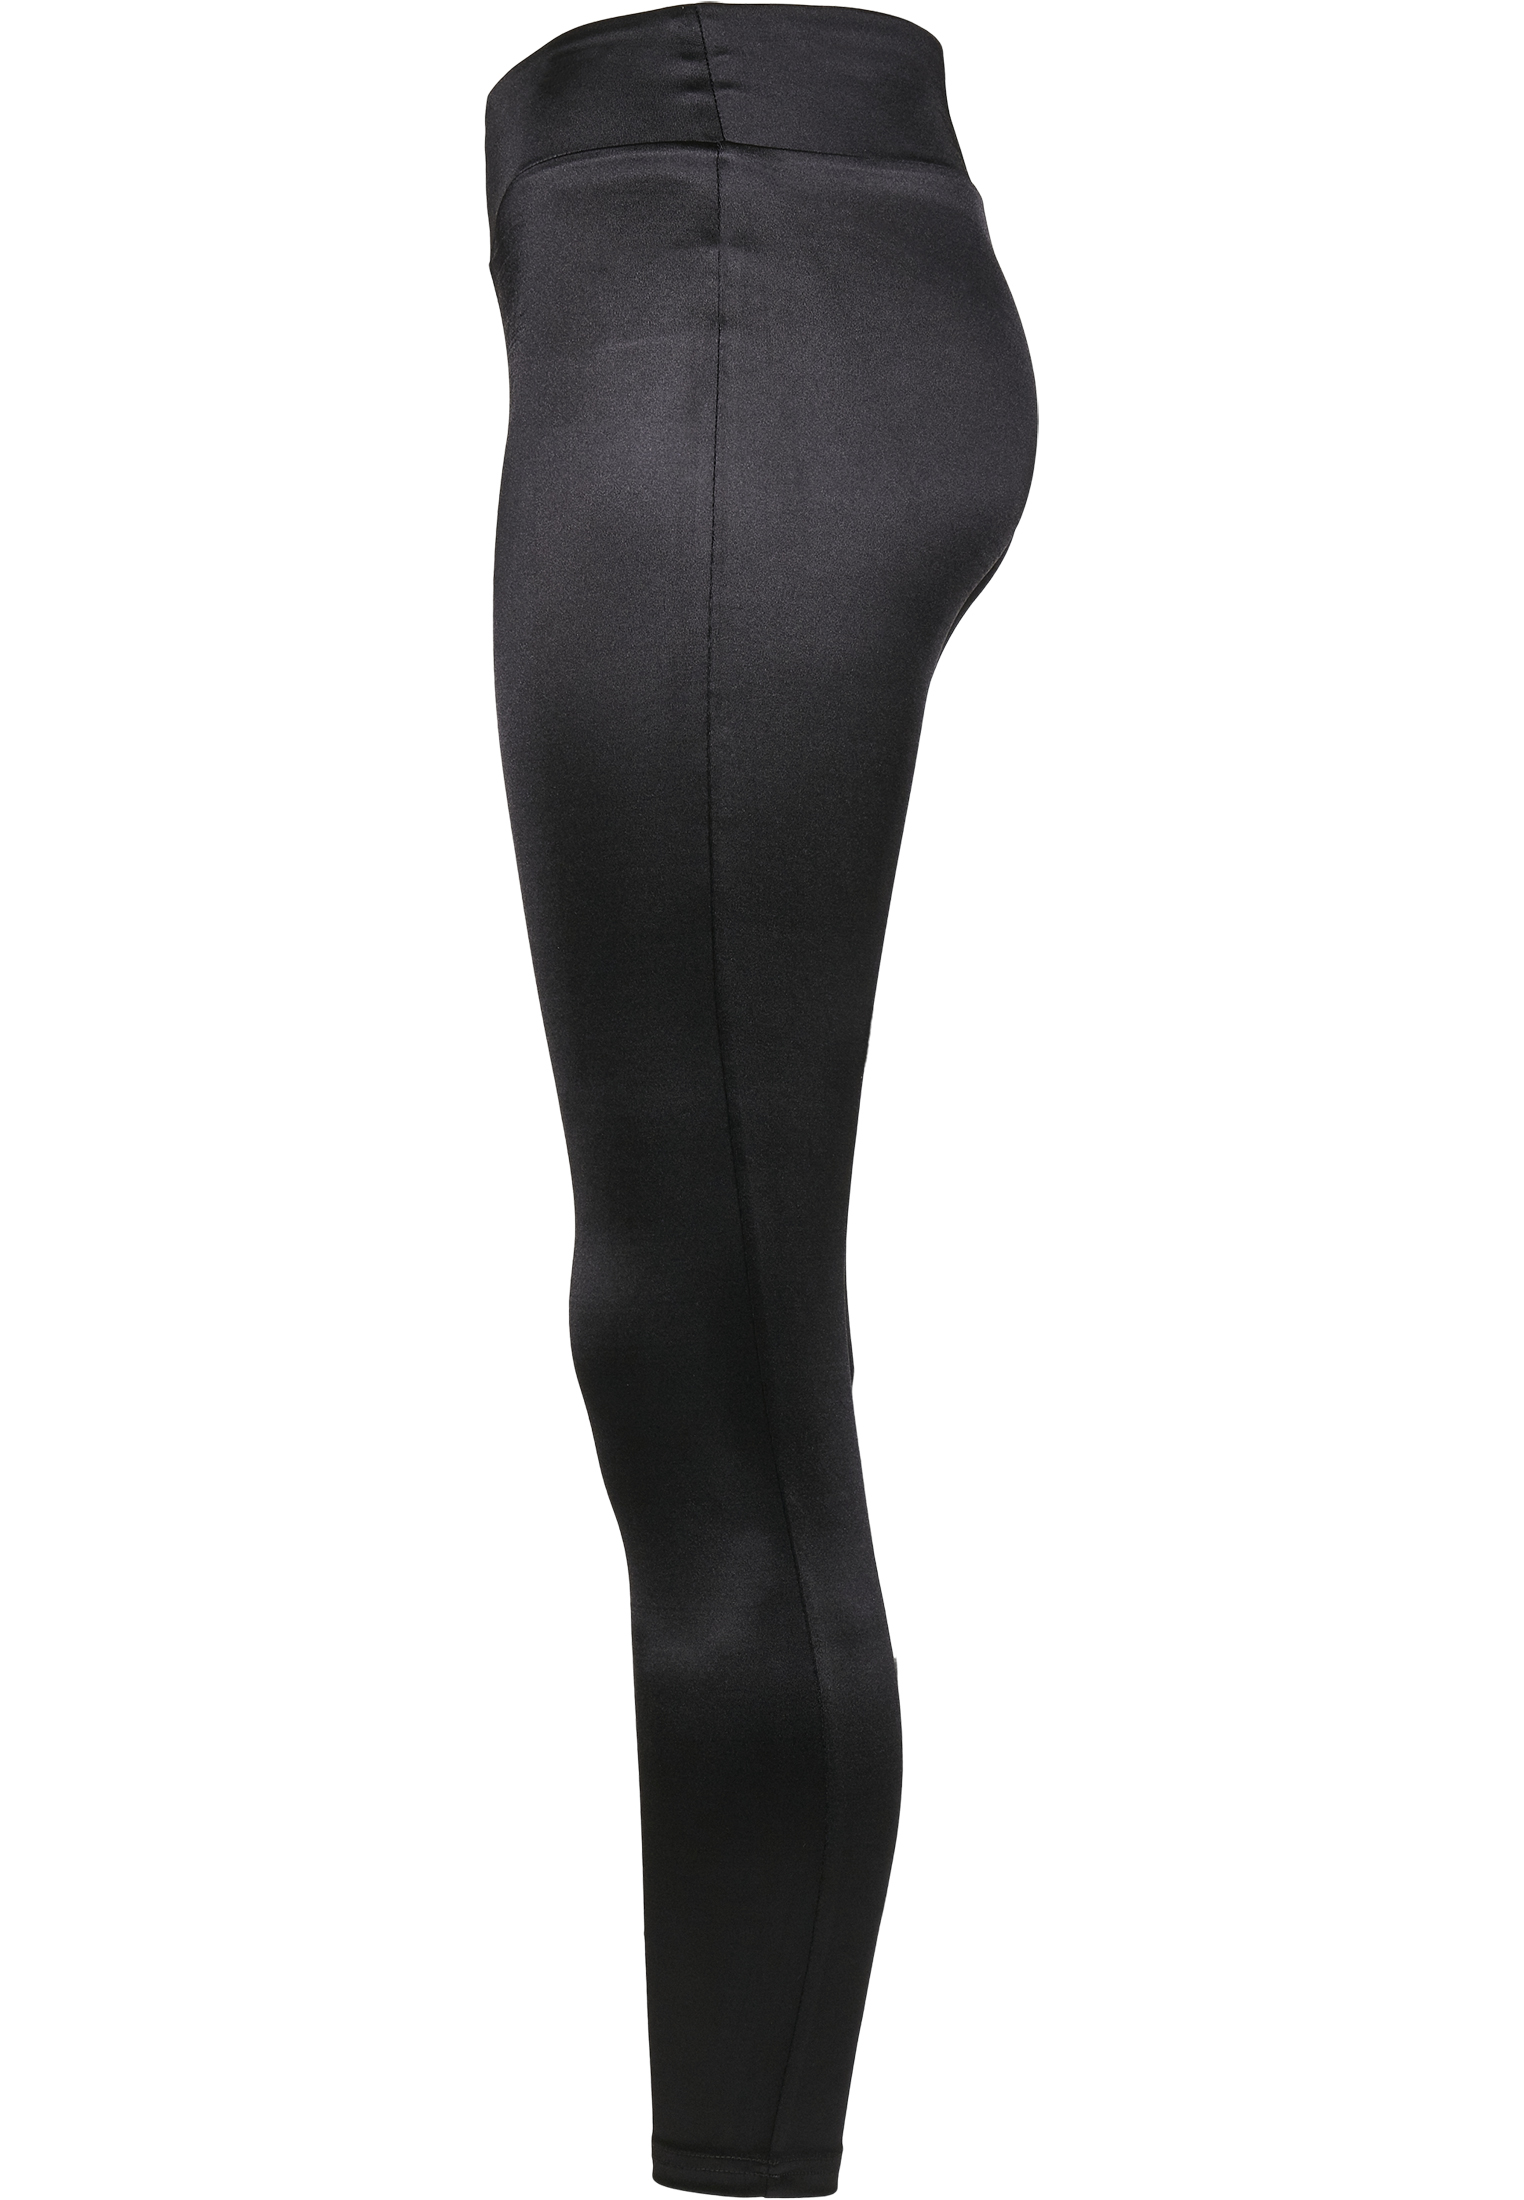 Buy Proskins Women's High Waisted Leggings Online at Low Prices in